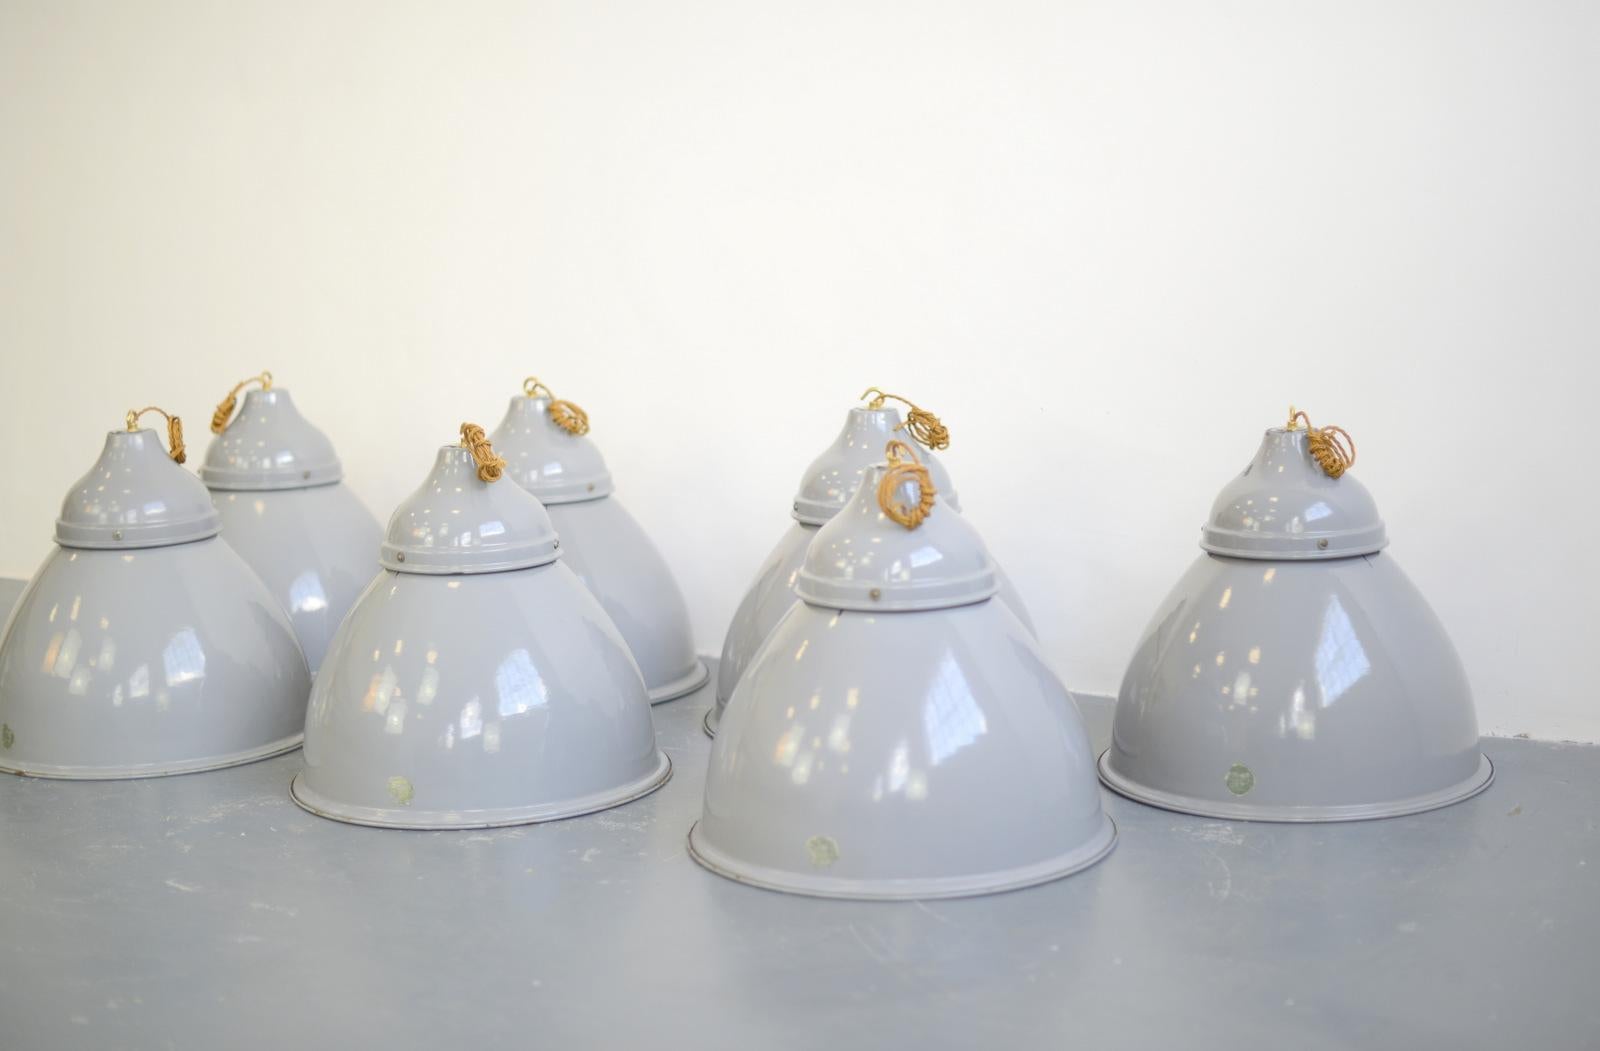 Large grey enamel Benjamin Factory lights circa 1950s V2

- Price is per lamp (23 available)
- Vitreous grey enamel bell shaped shades
- White enamel inner reflector with copper detail
- Takes E27 fitting bulbs
- Comes with 100 cm of cable and